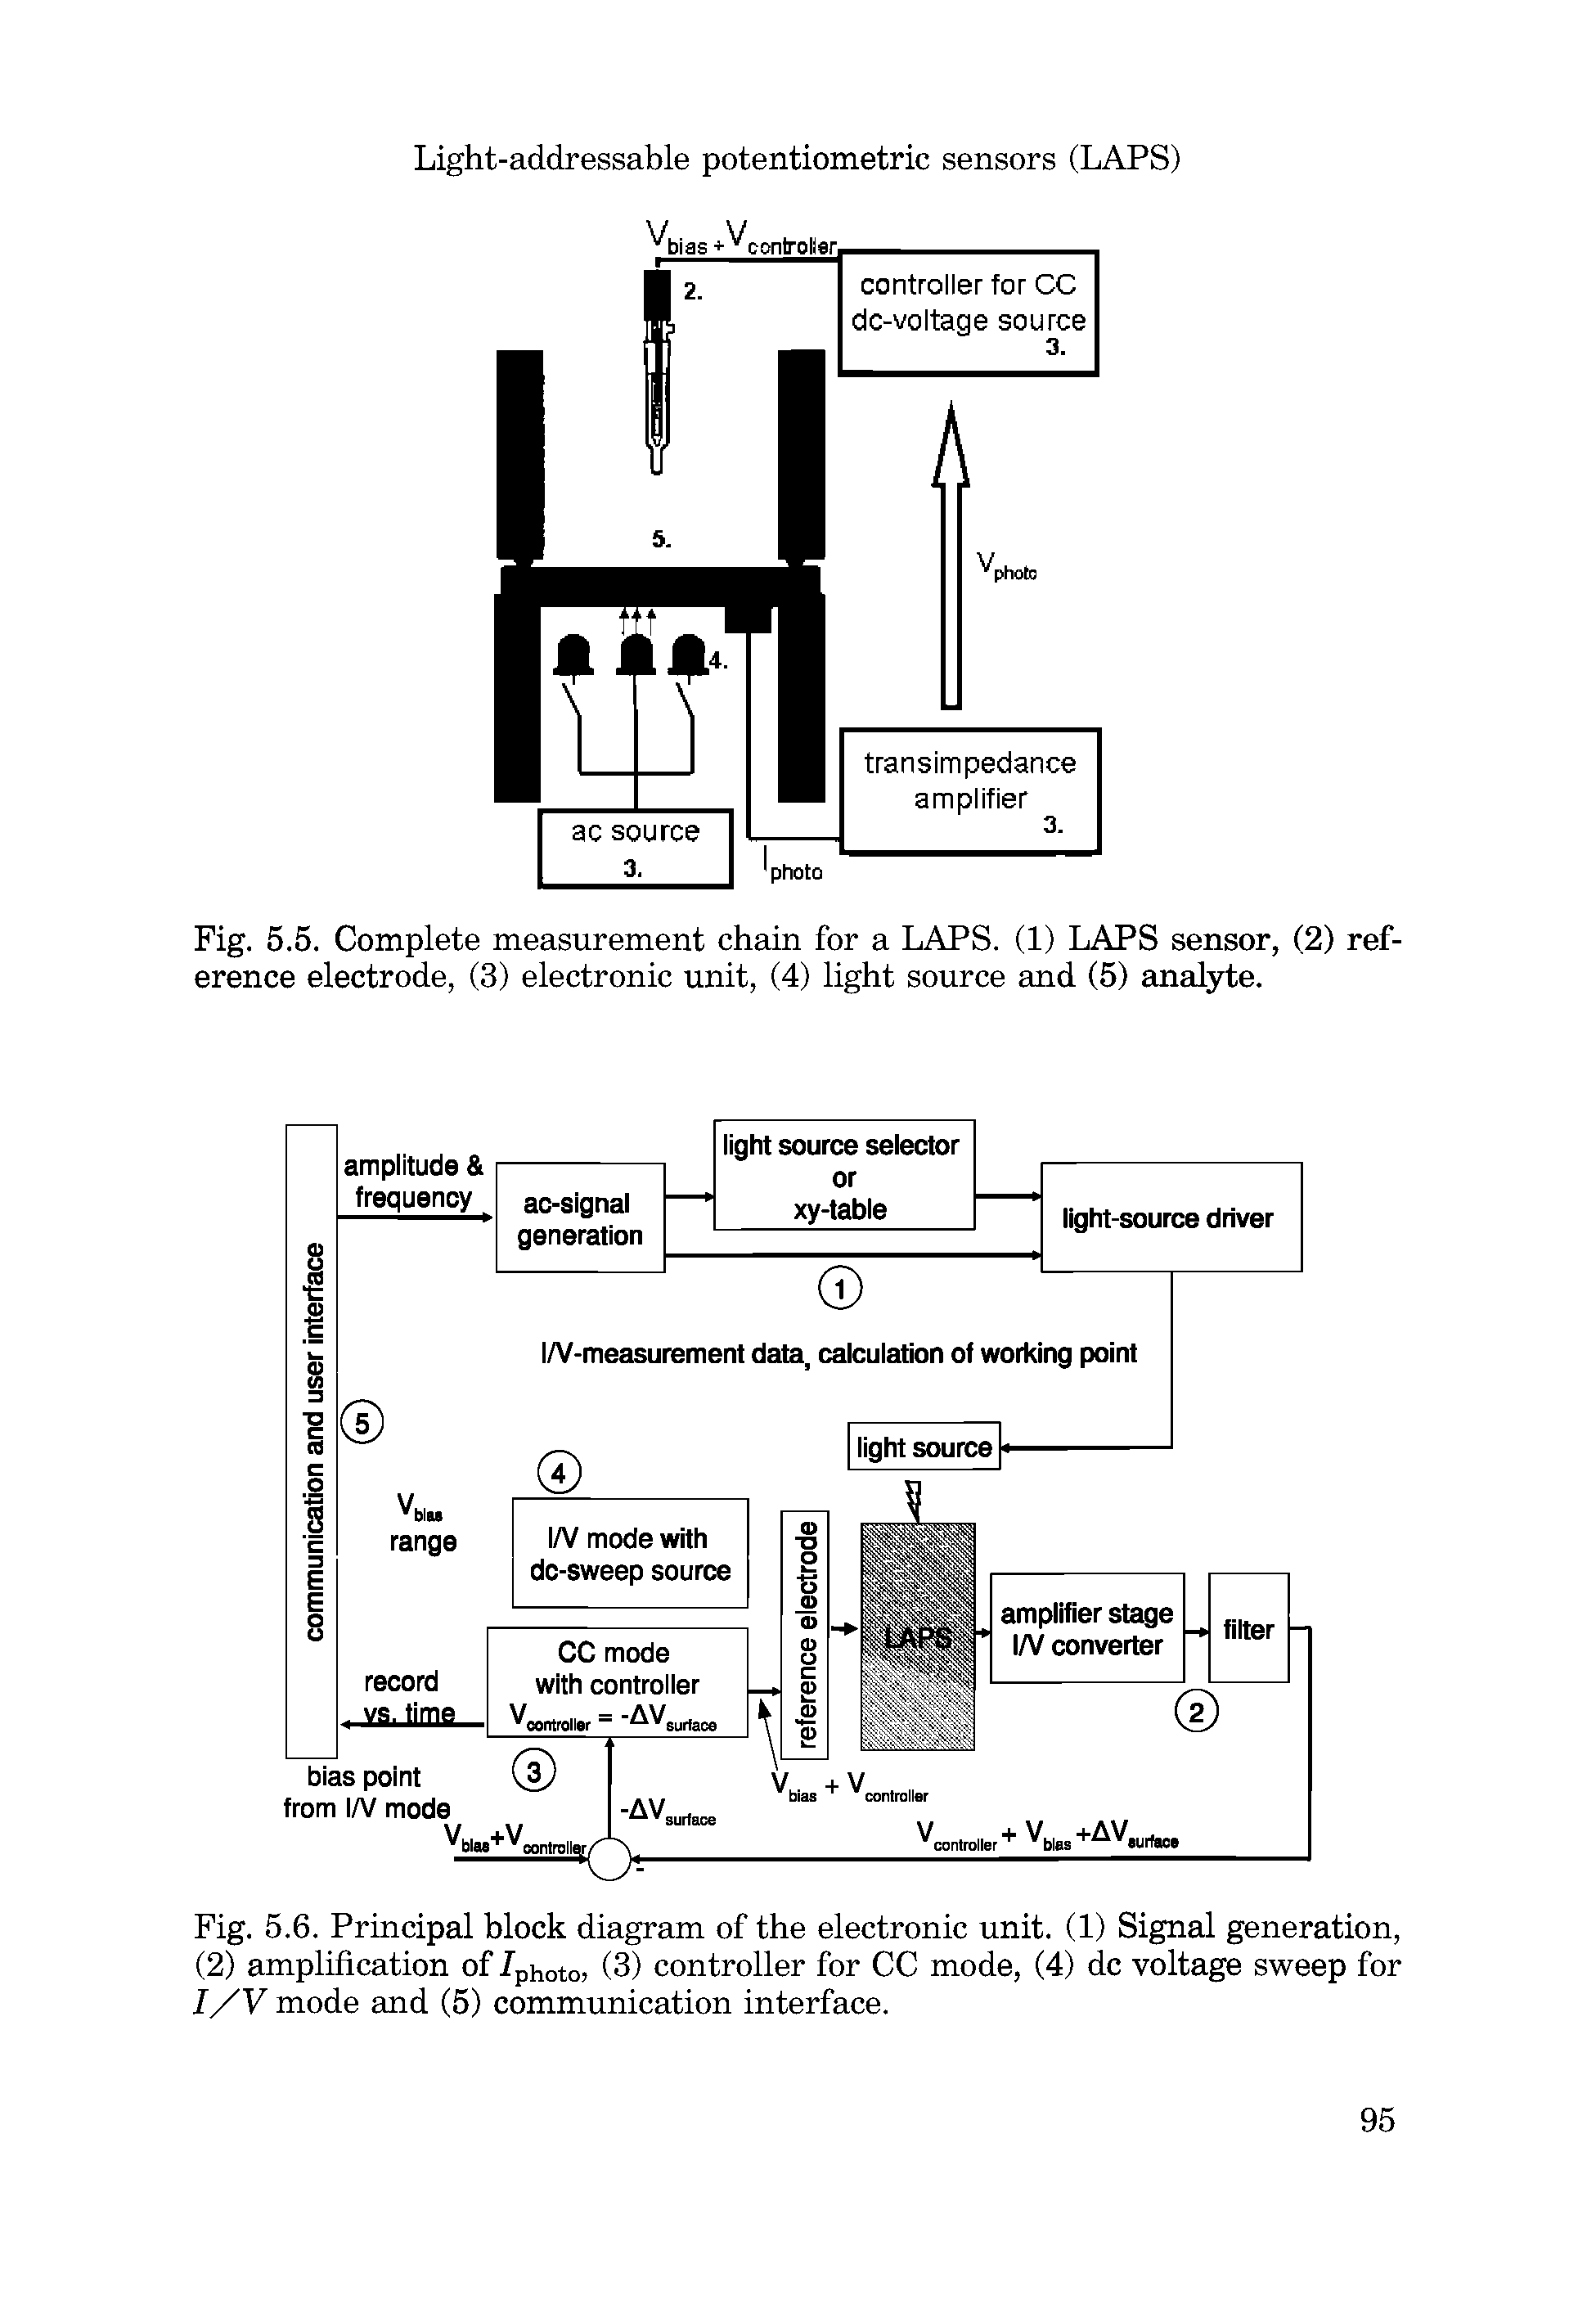 Fig. 5.6. Principal block diagram of the electronic unit. (1) Signal generation, (2) amplification of /photo, (3) controller for CC mode, (4) dc voltage sweep for I/V mode and (5) communication interface.